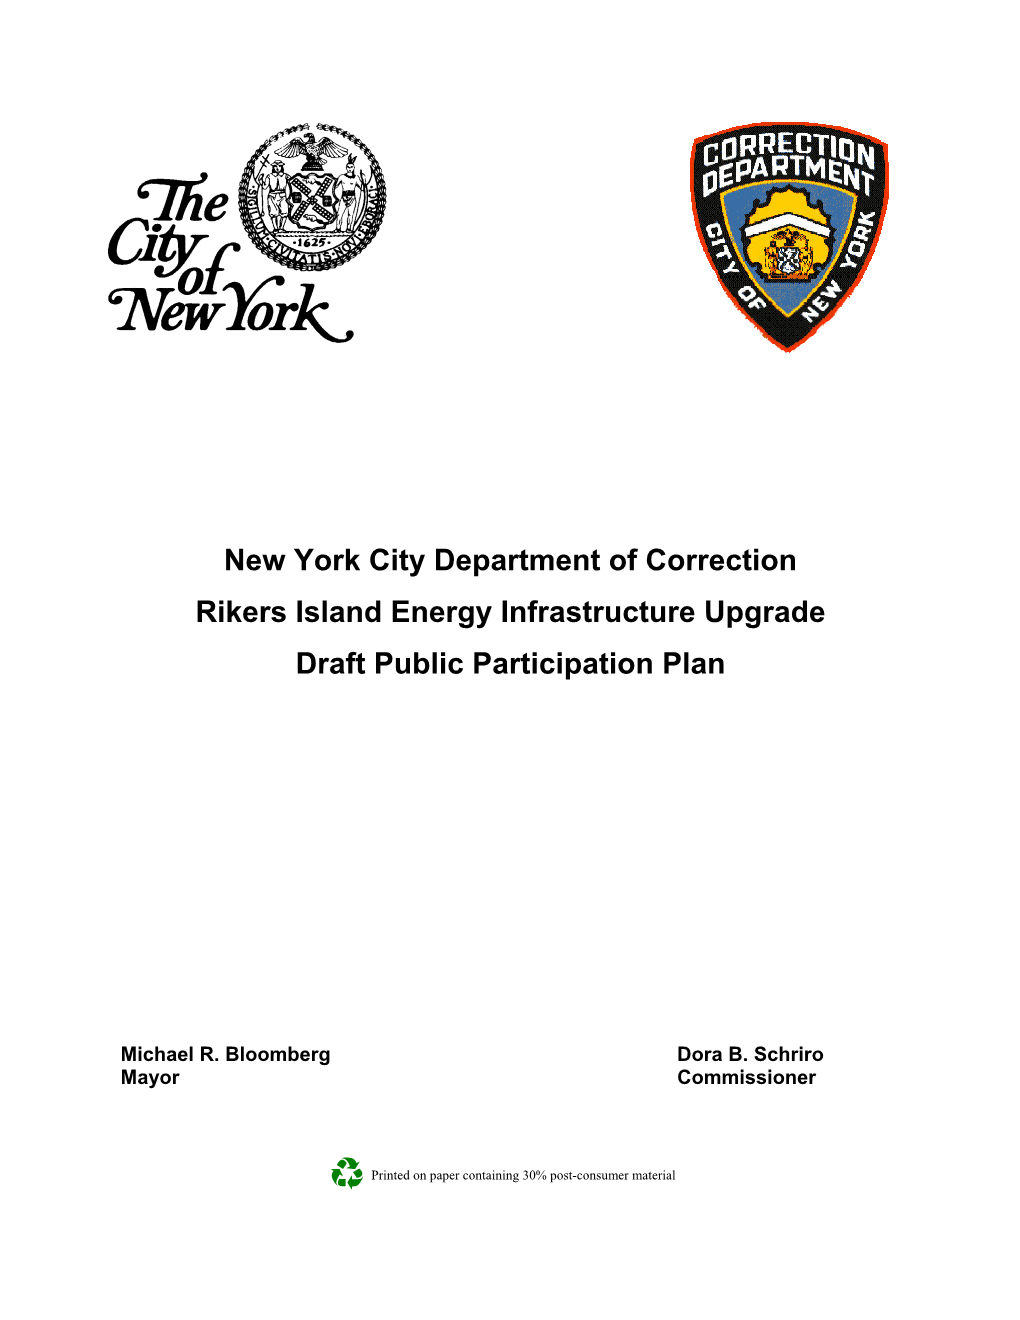 New York City Department of Correction Rikers Island Energy Infrastructure Upgrade Draft Public Participation Plan